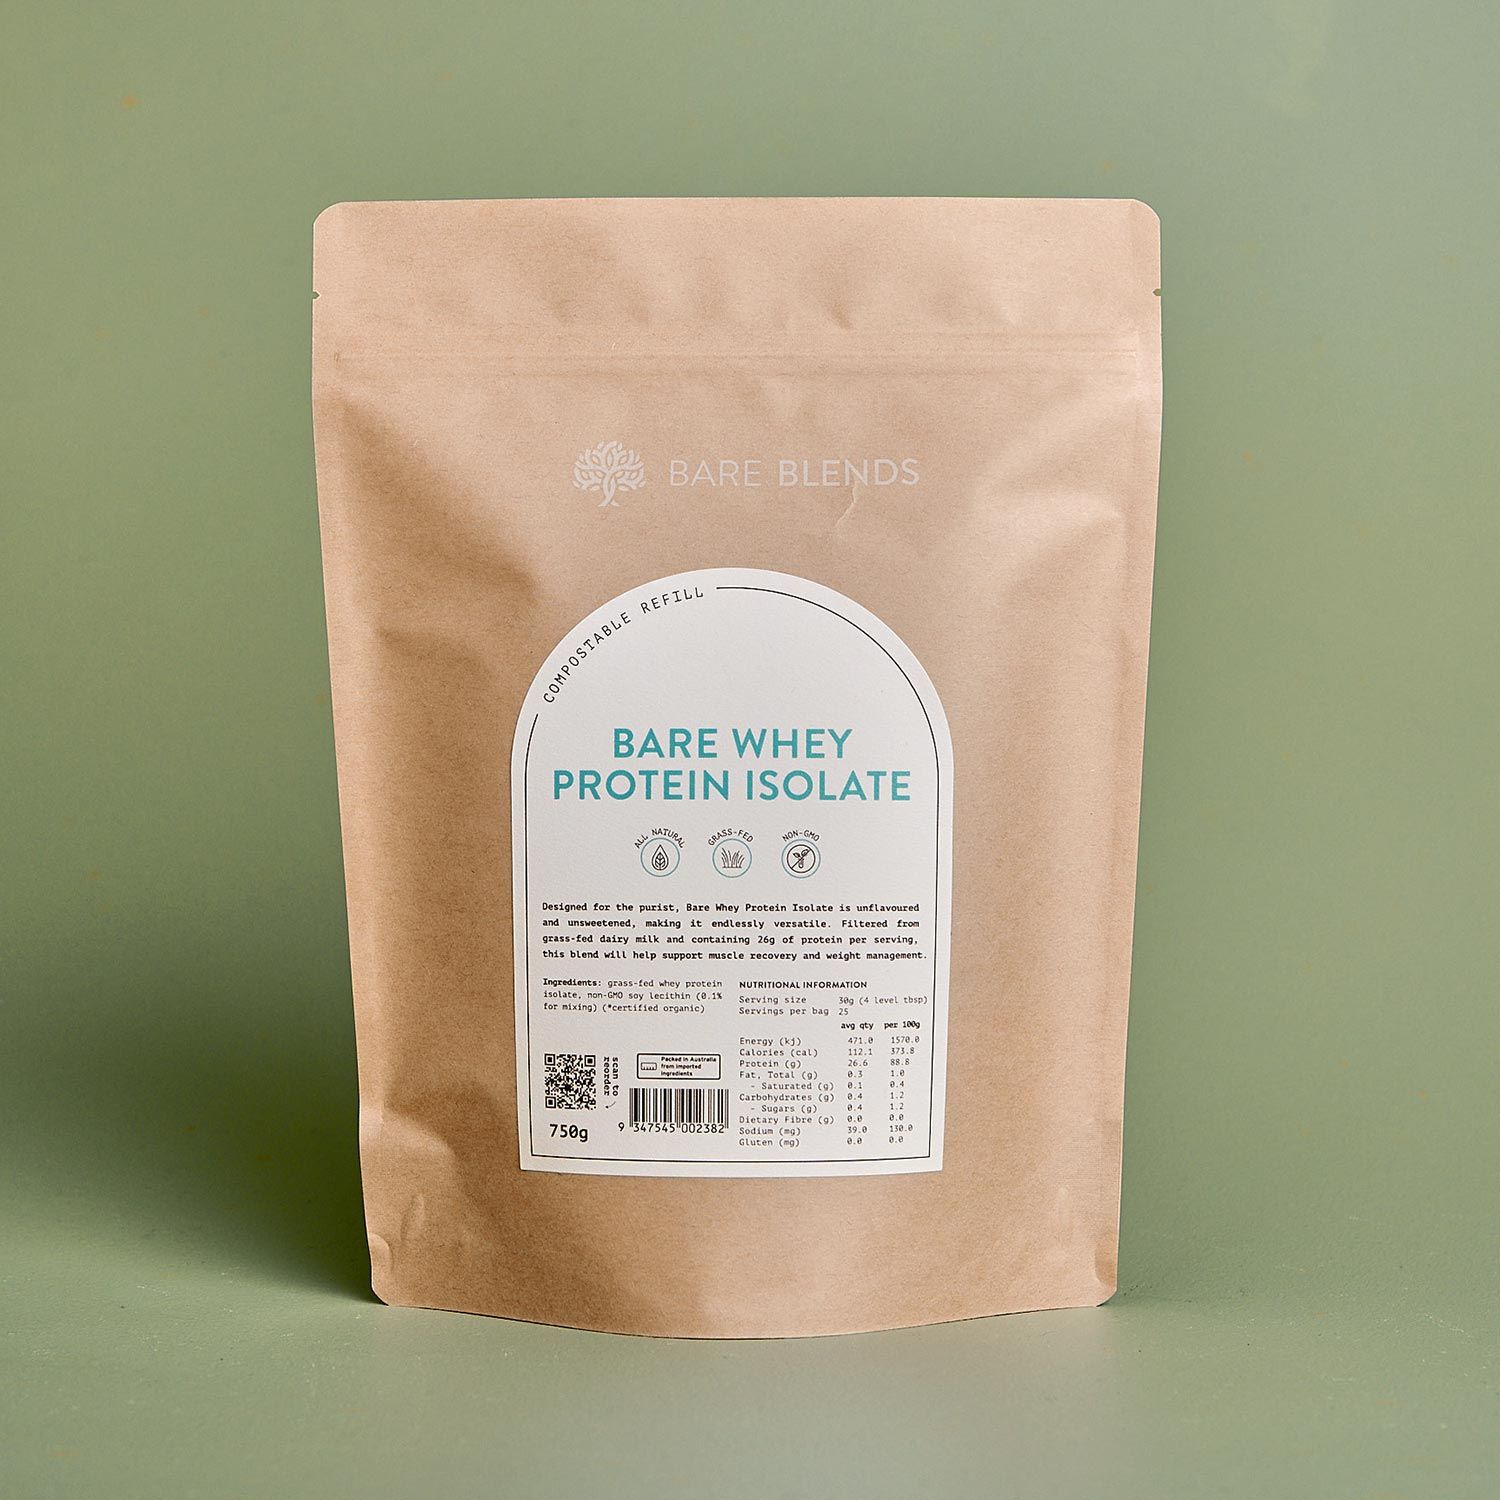 Bare Whey Protein Isolate Home-compostable Pouch